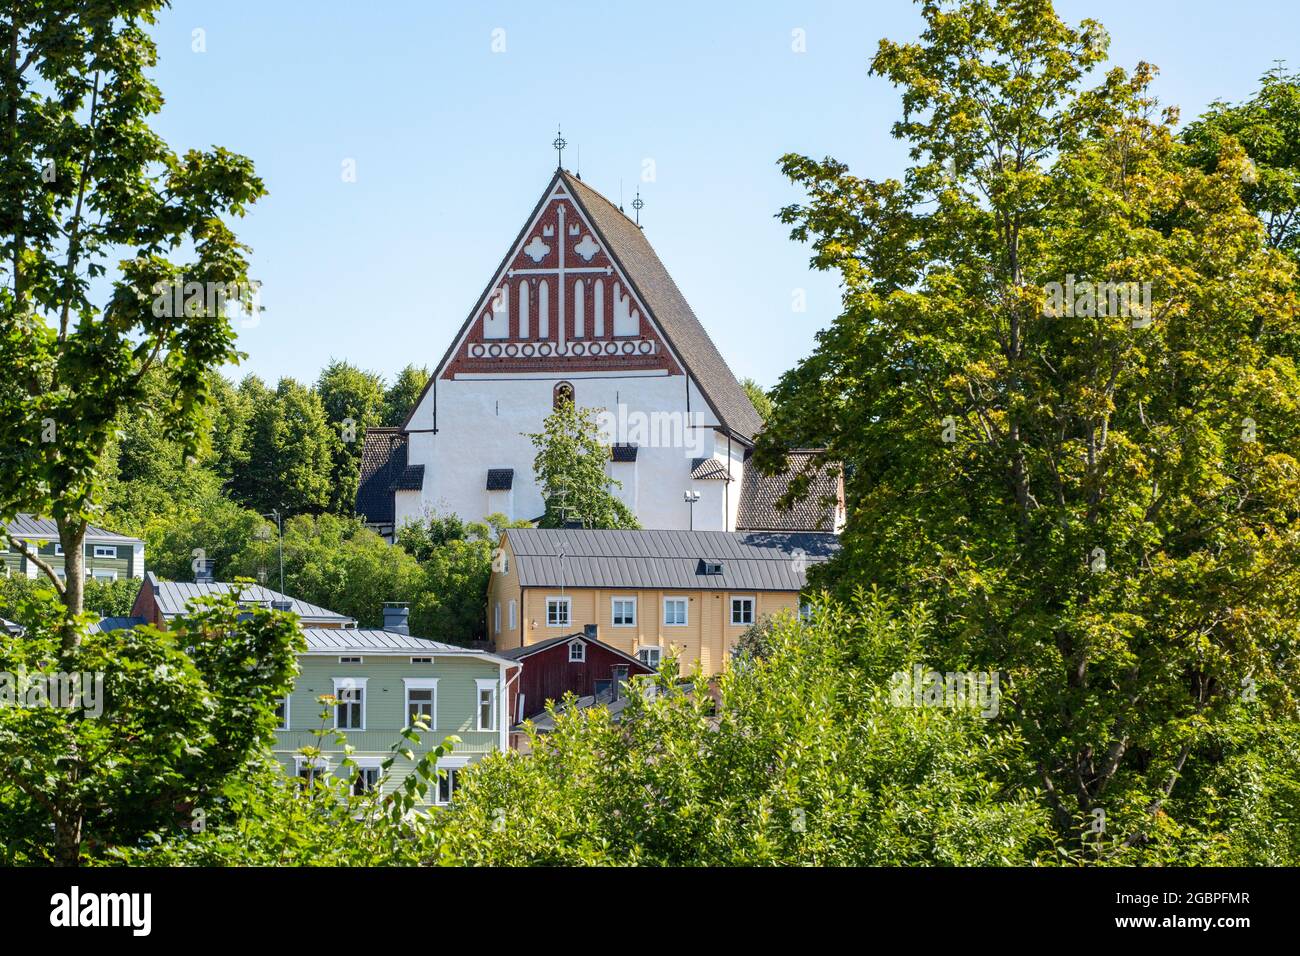 Porvoo Cathedral is an old stone church, a visible landmark standing high on a hill above colorful old wooden houses of Old Porvoo, Finland Stock Photo